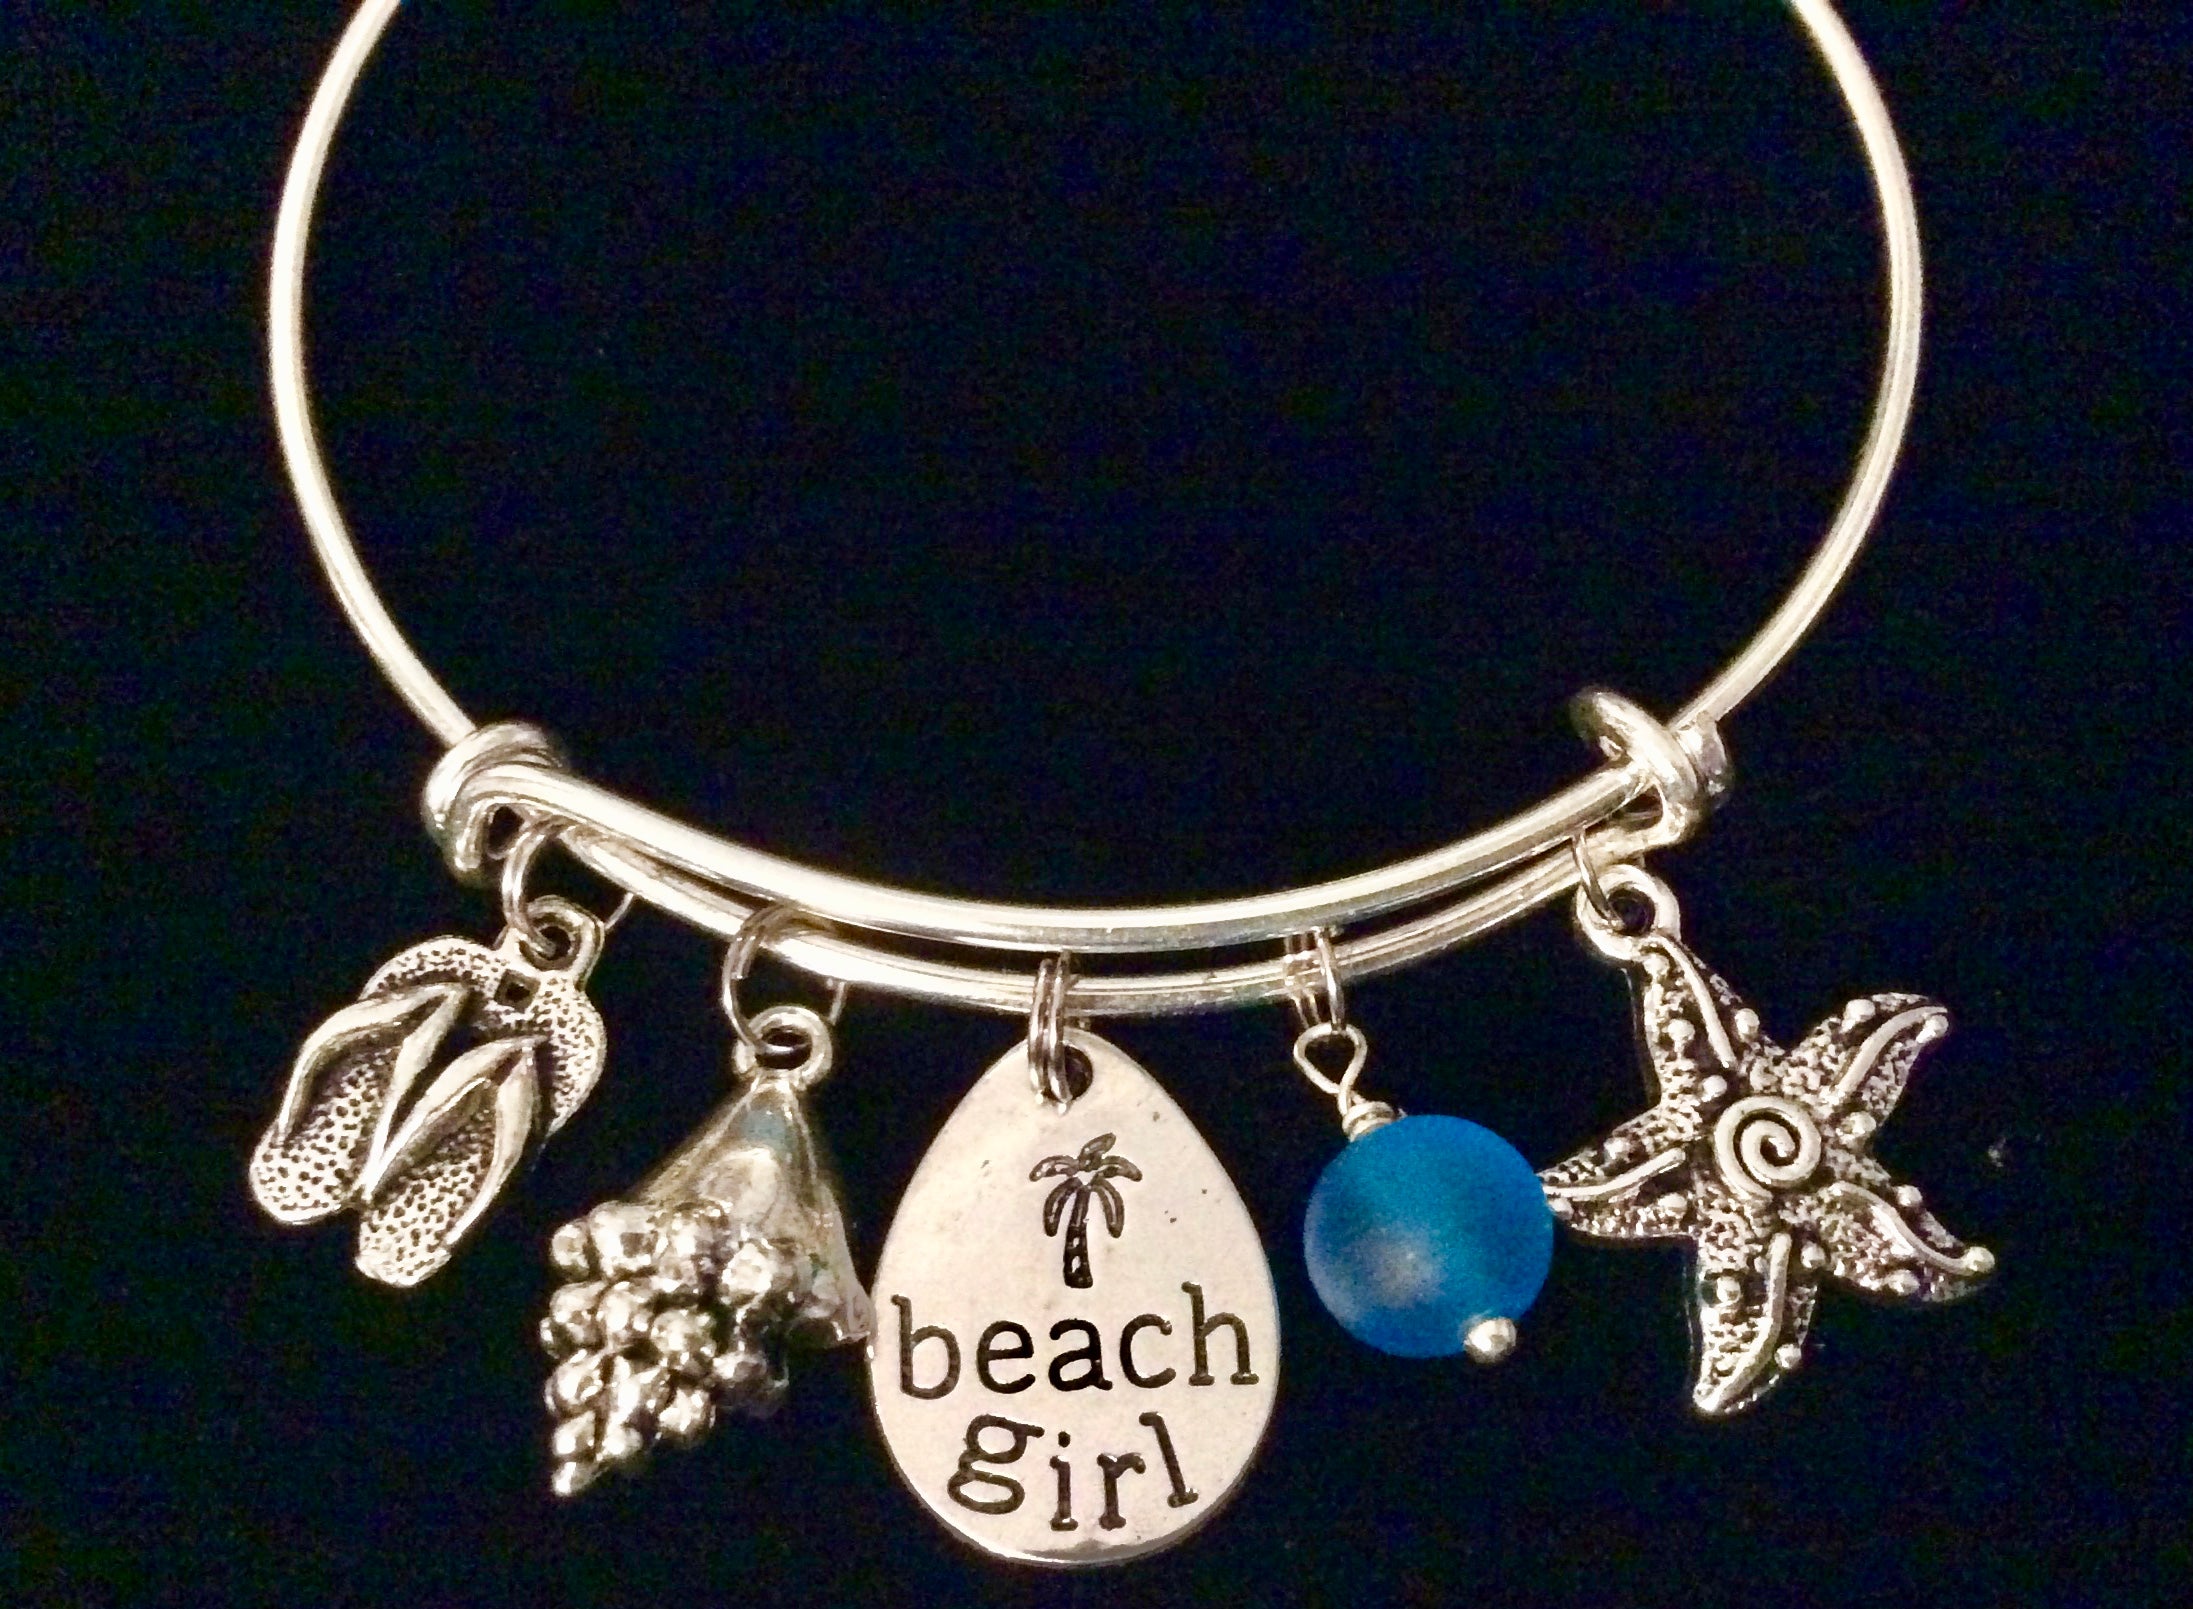 Beach Girl Jewelry Sea Glass Nautical Charm Bracelet Sea Shell Flip Flop Silver Expandable Adjustable Wire Bangle Bracelet Stacking One Size Fits All